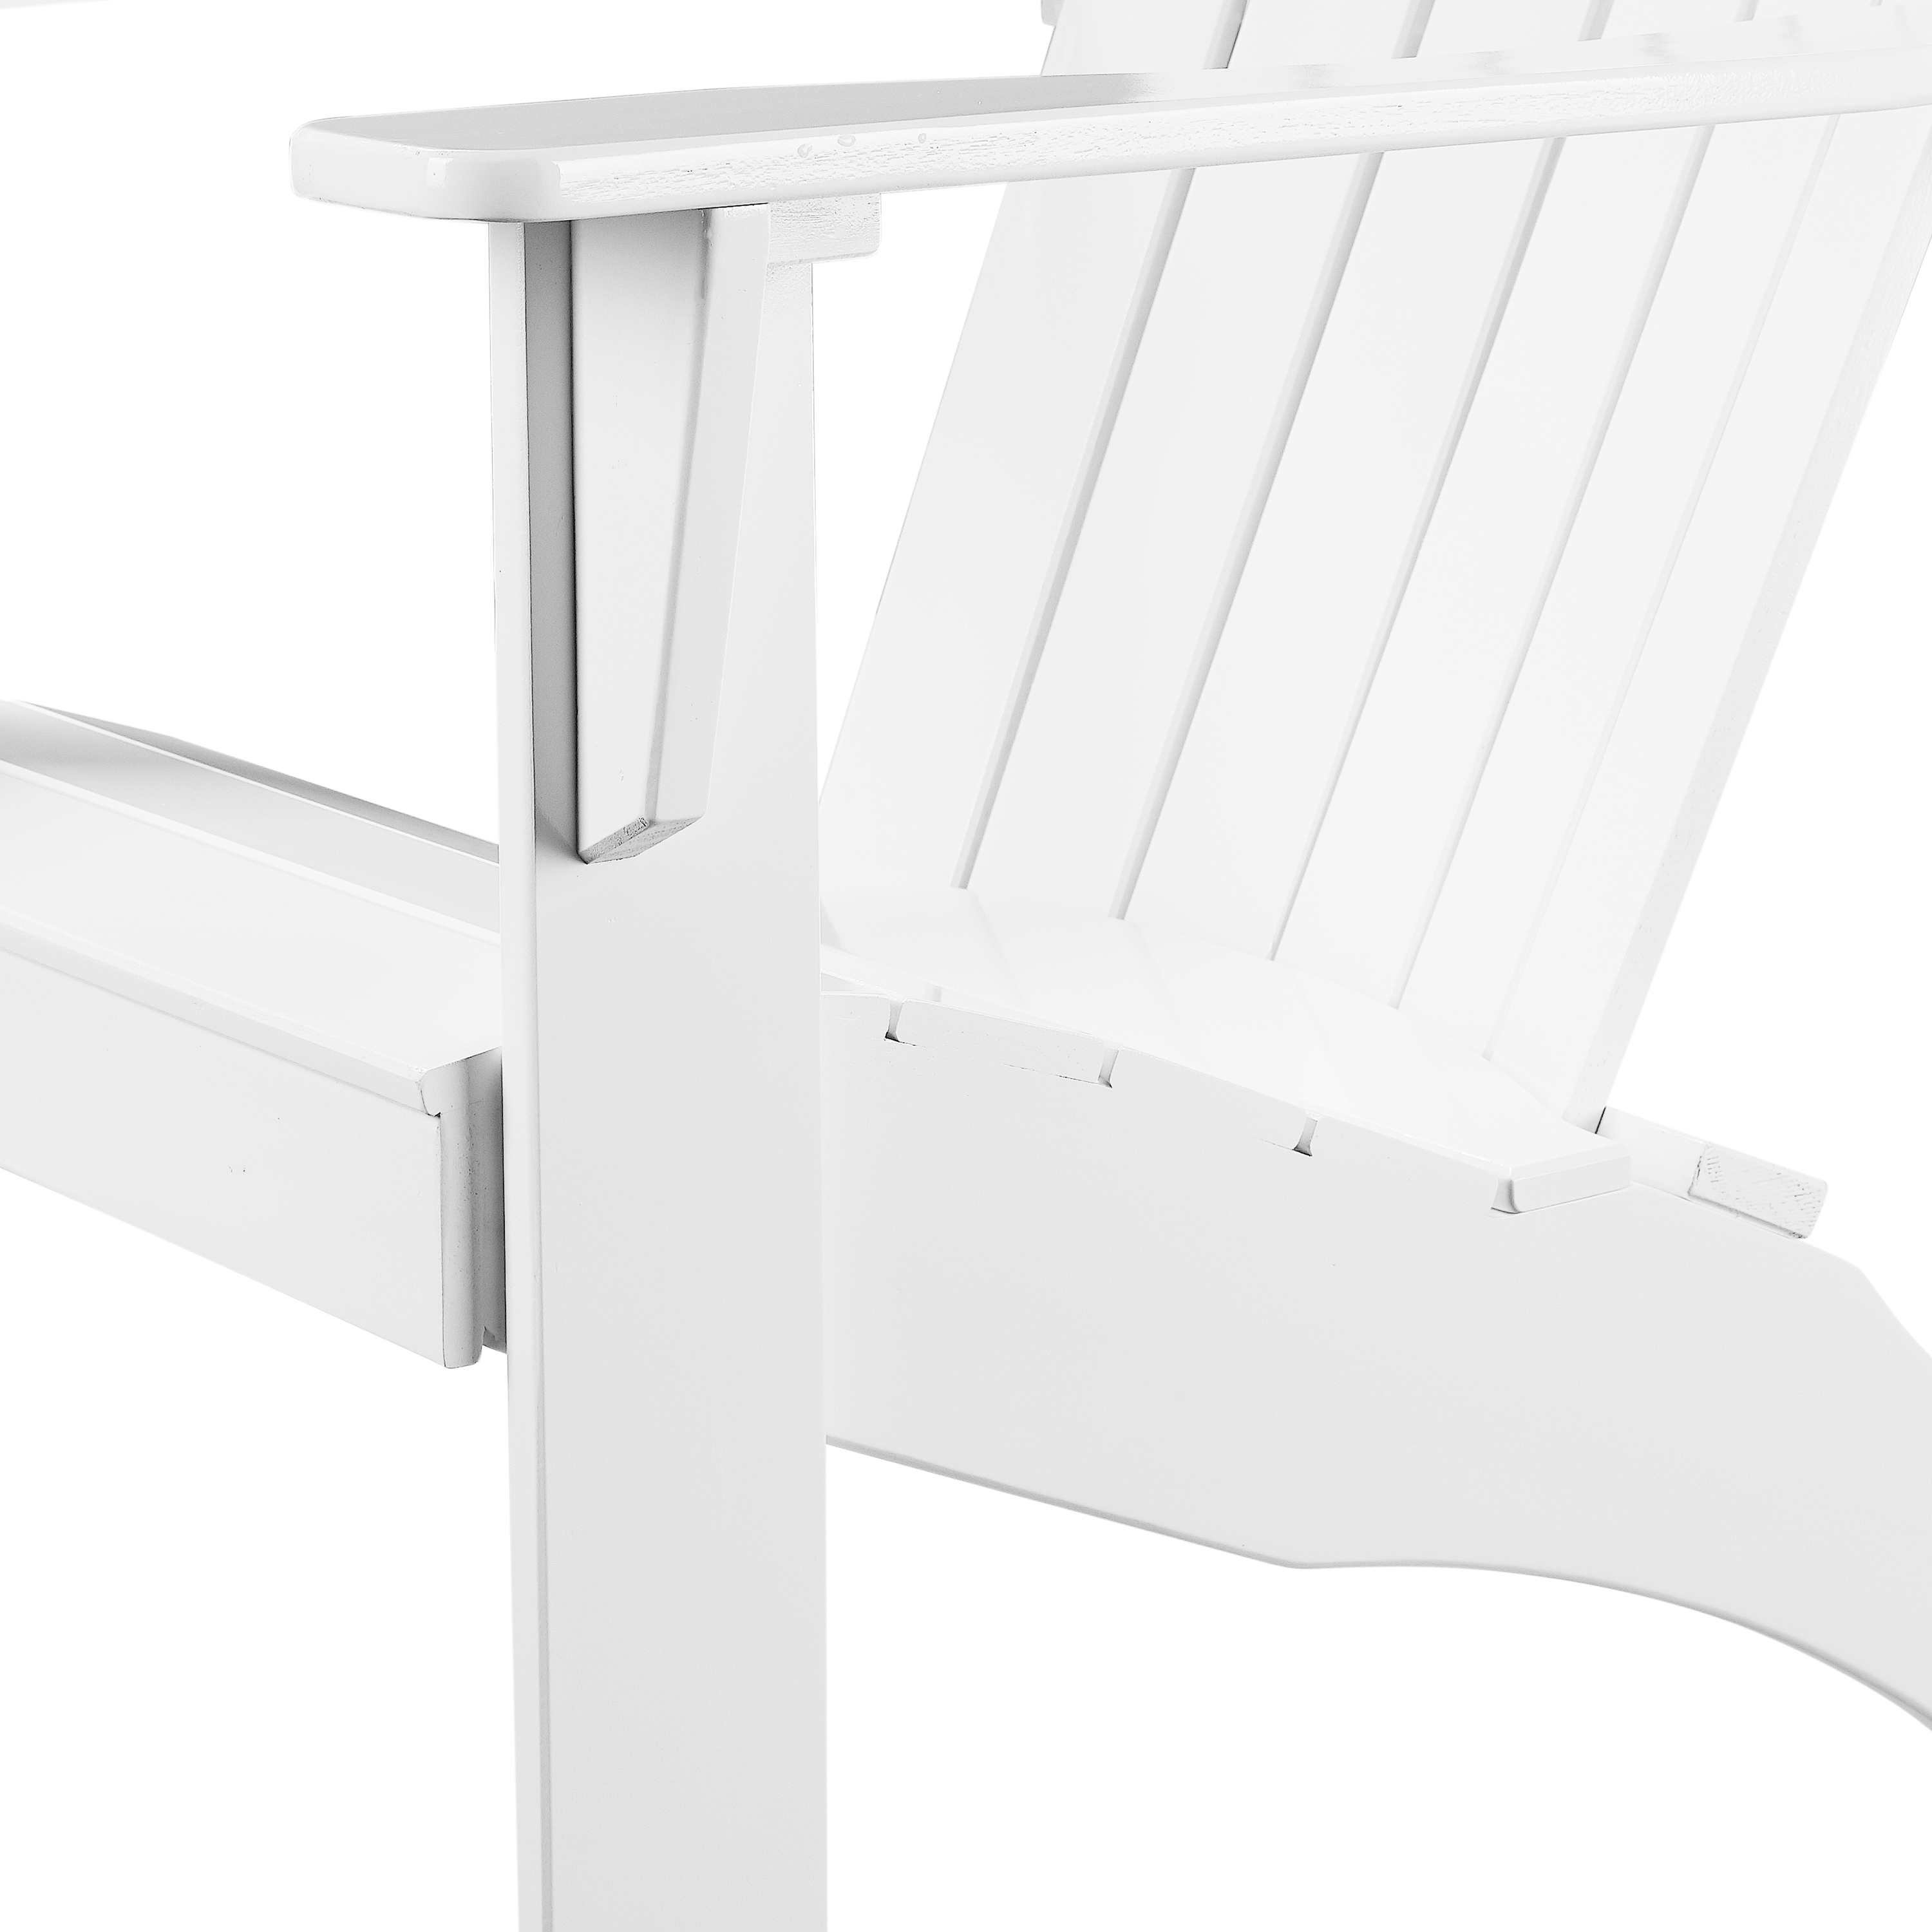 Mainstays Weather Resistant Rubberwood Adirondack Chair - White - image 2 of 9